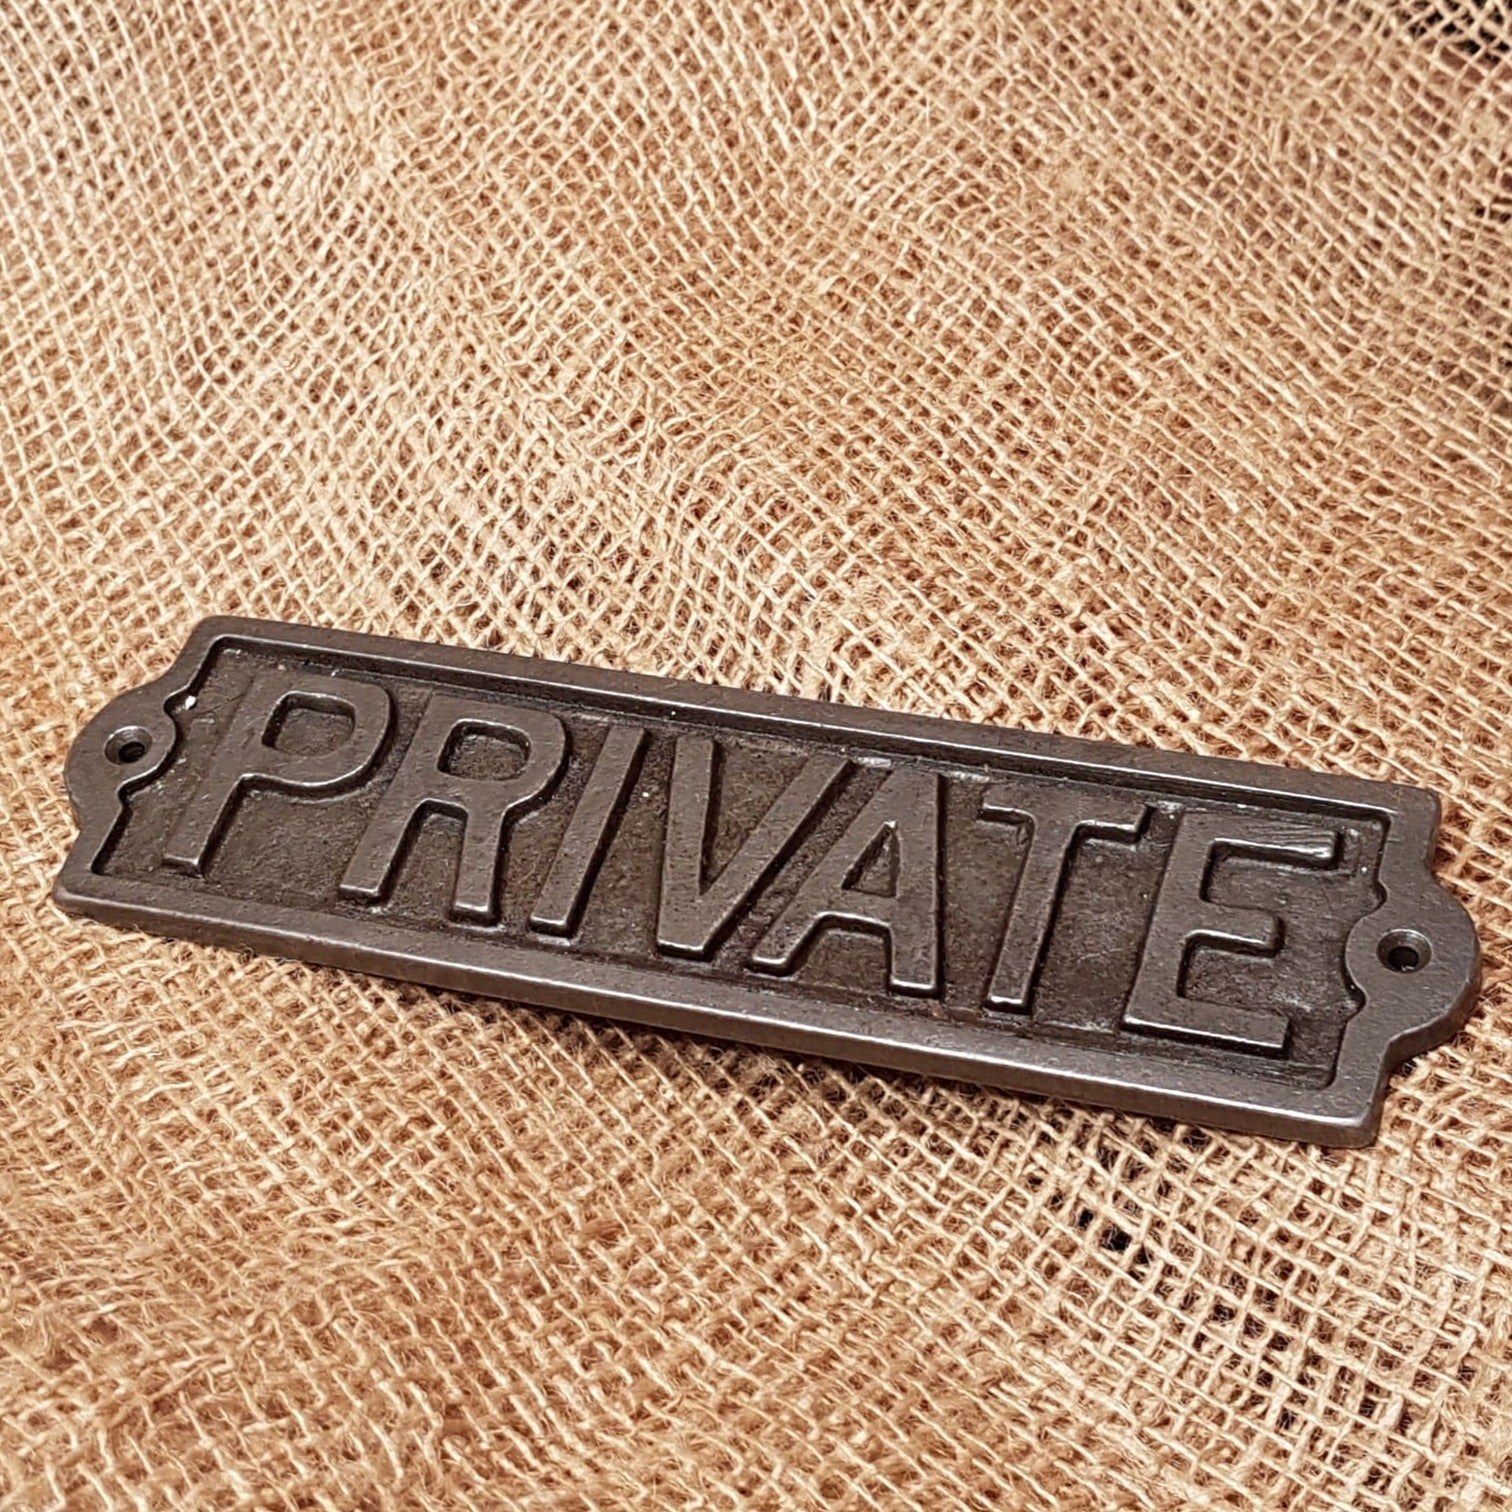 PRIVATE - Spearhead Collection - Plaques and Signs - Home Decor, Office Decor, Plaques and Signs